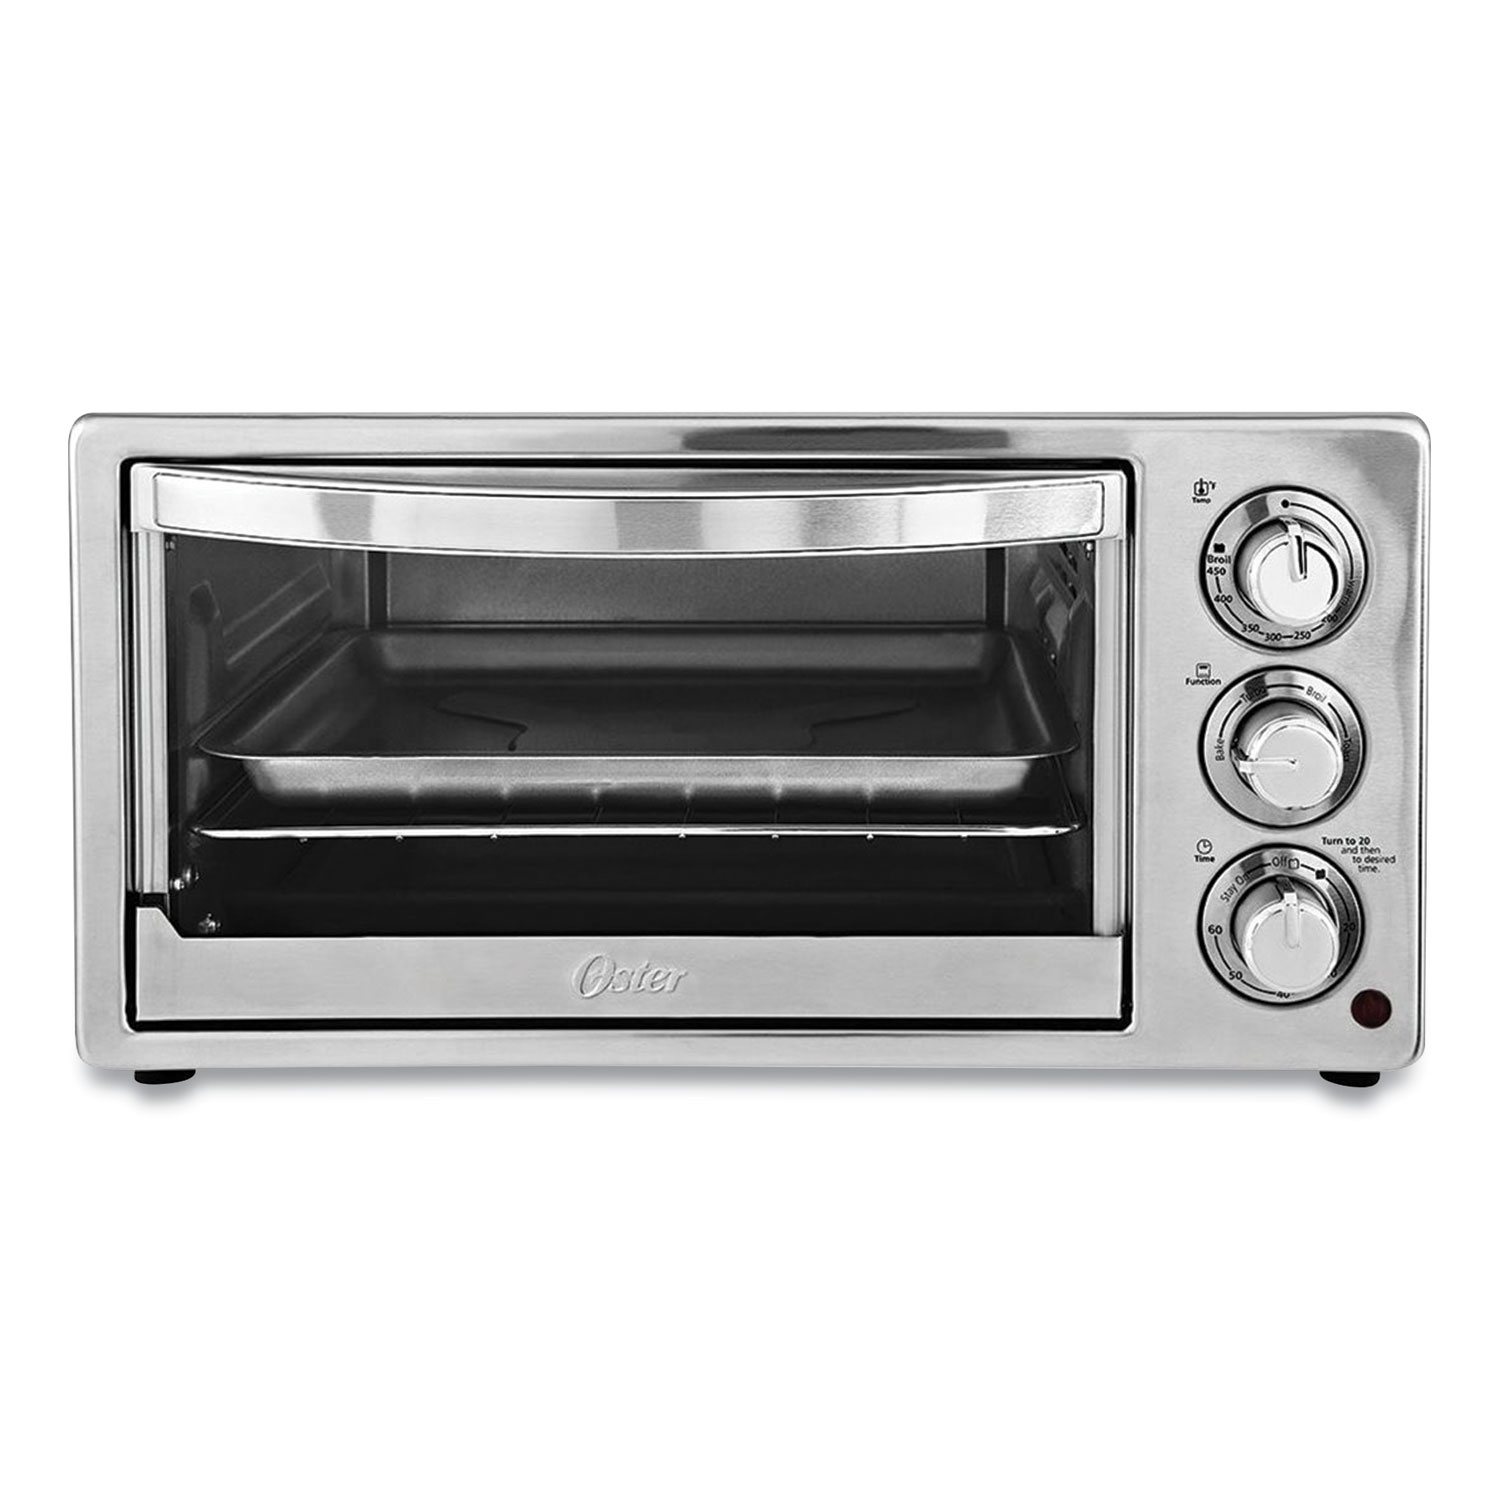 Oster® Convection Toaster Oven, 6-Slice, 16.8 x 13.1 x 9, Stainless Steel/Black